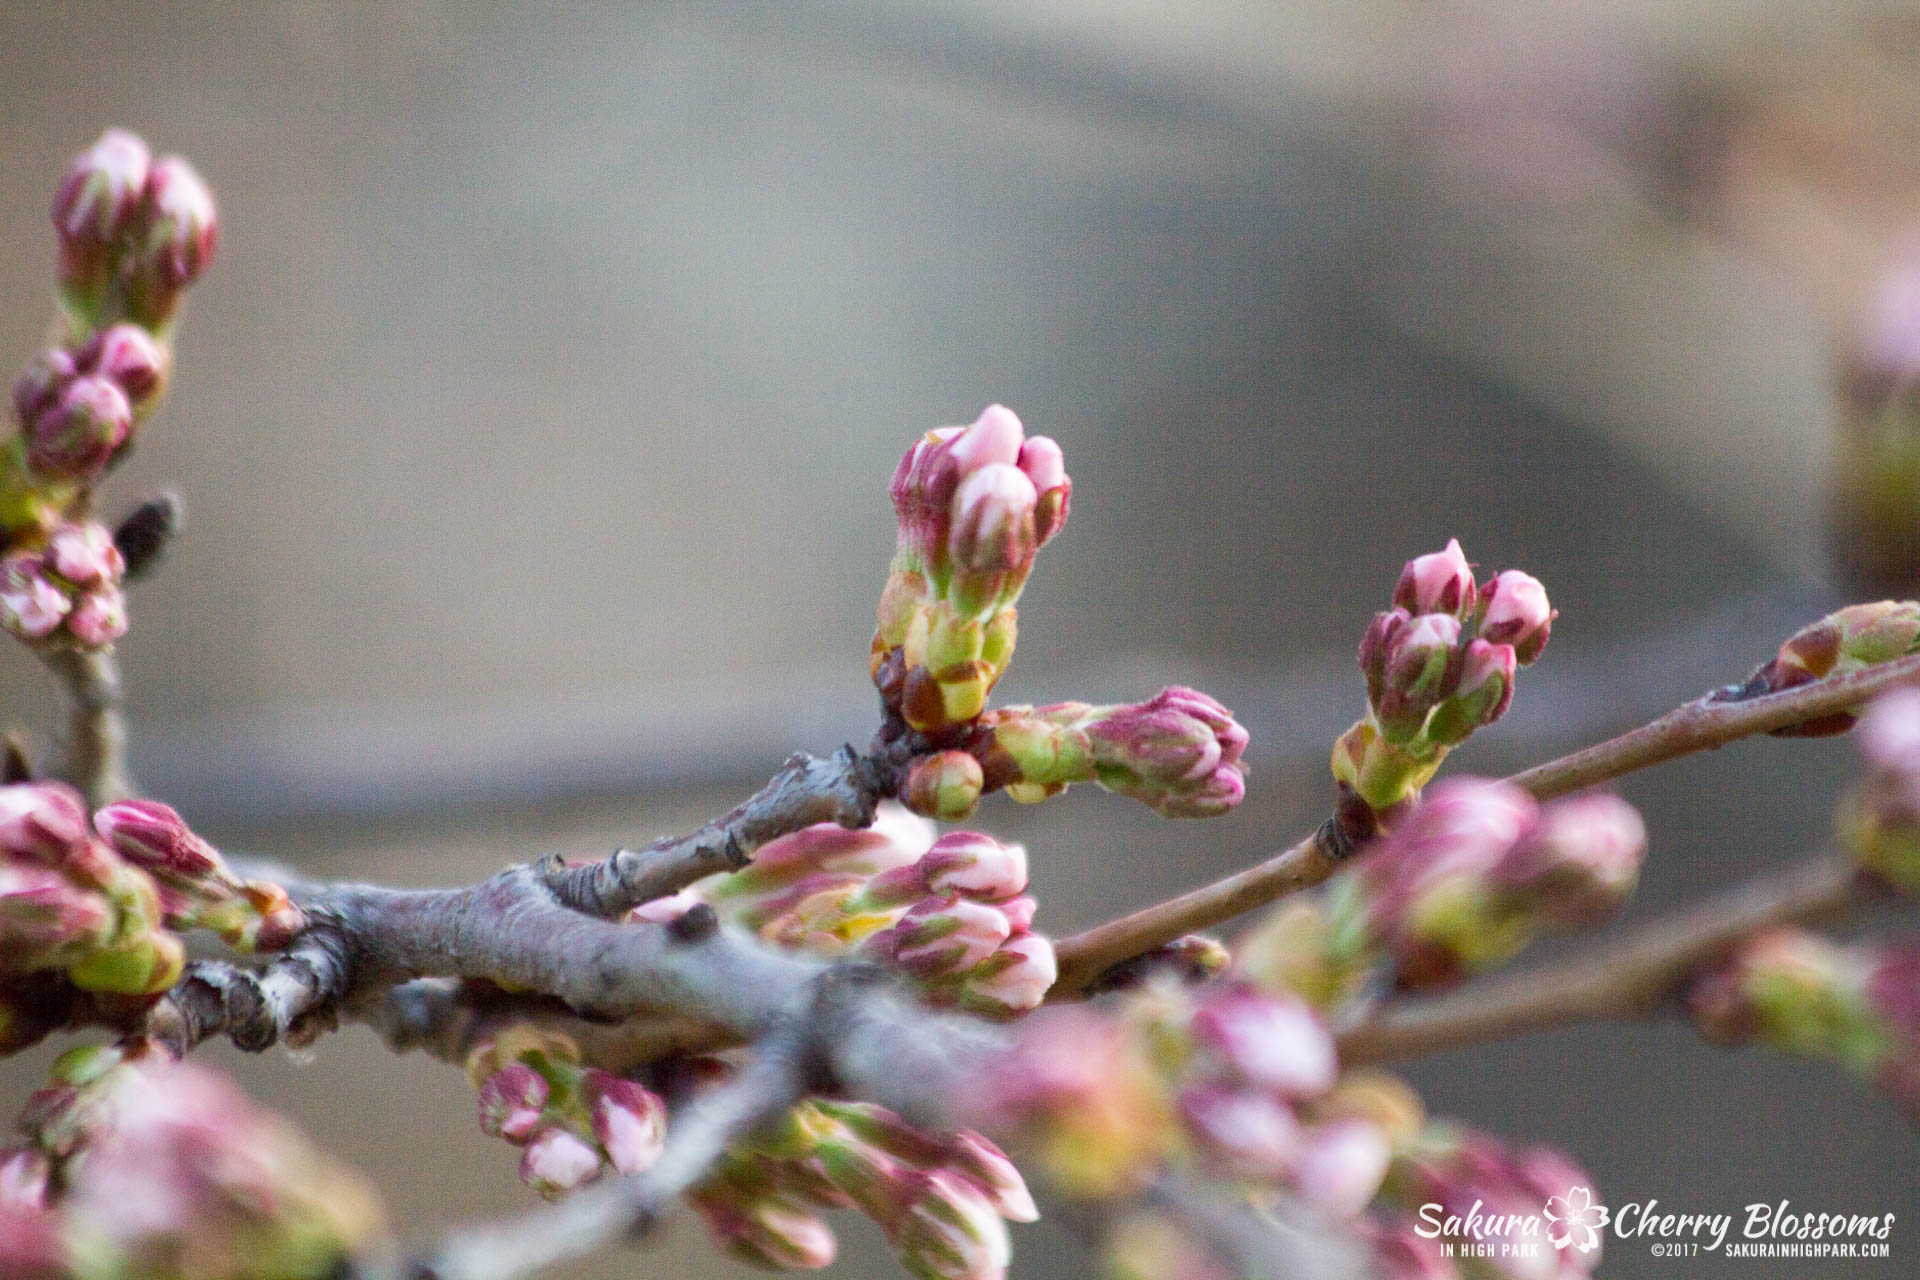 Sakura-in-High-Park-April-17-2017-florets-are-emerging-from-the-buds-throughout-the-park-20.jpg